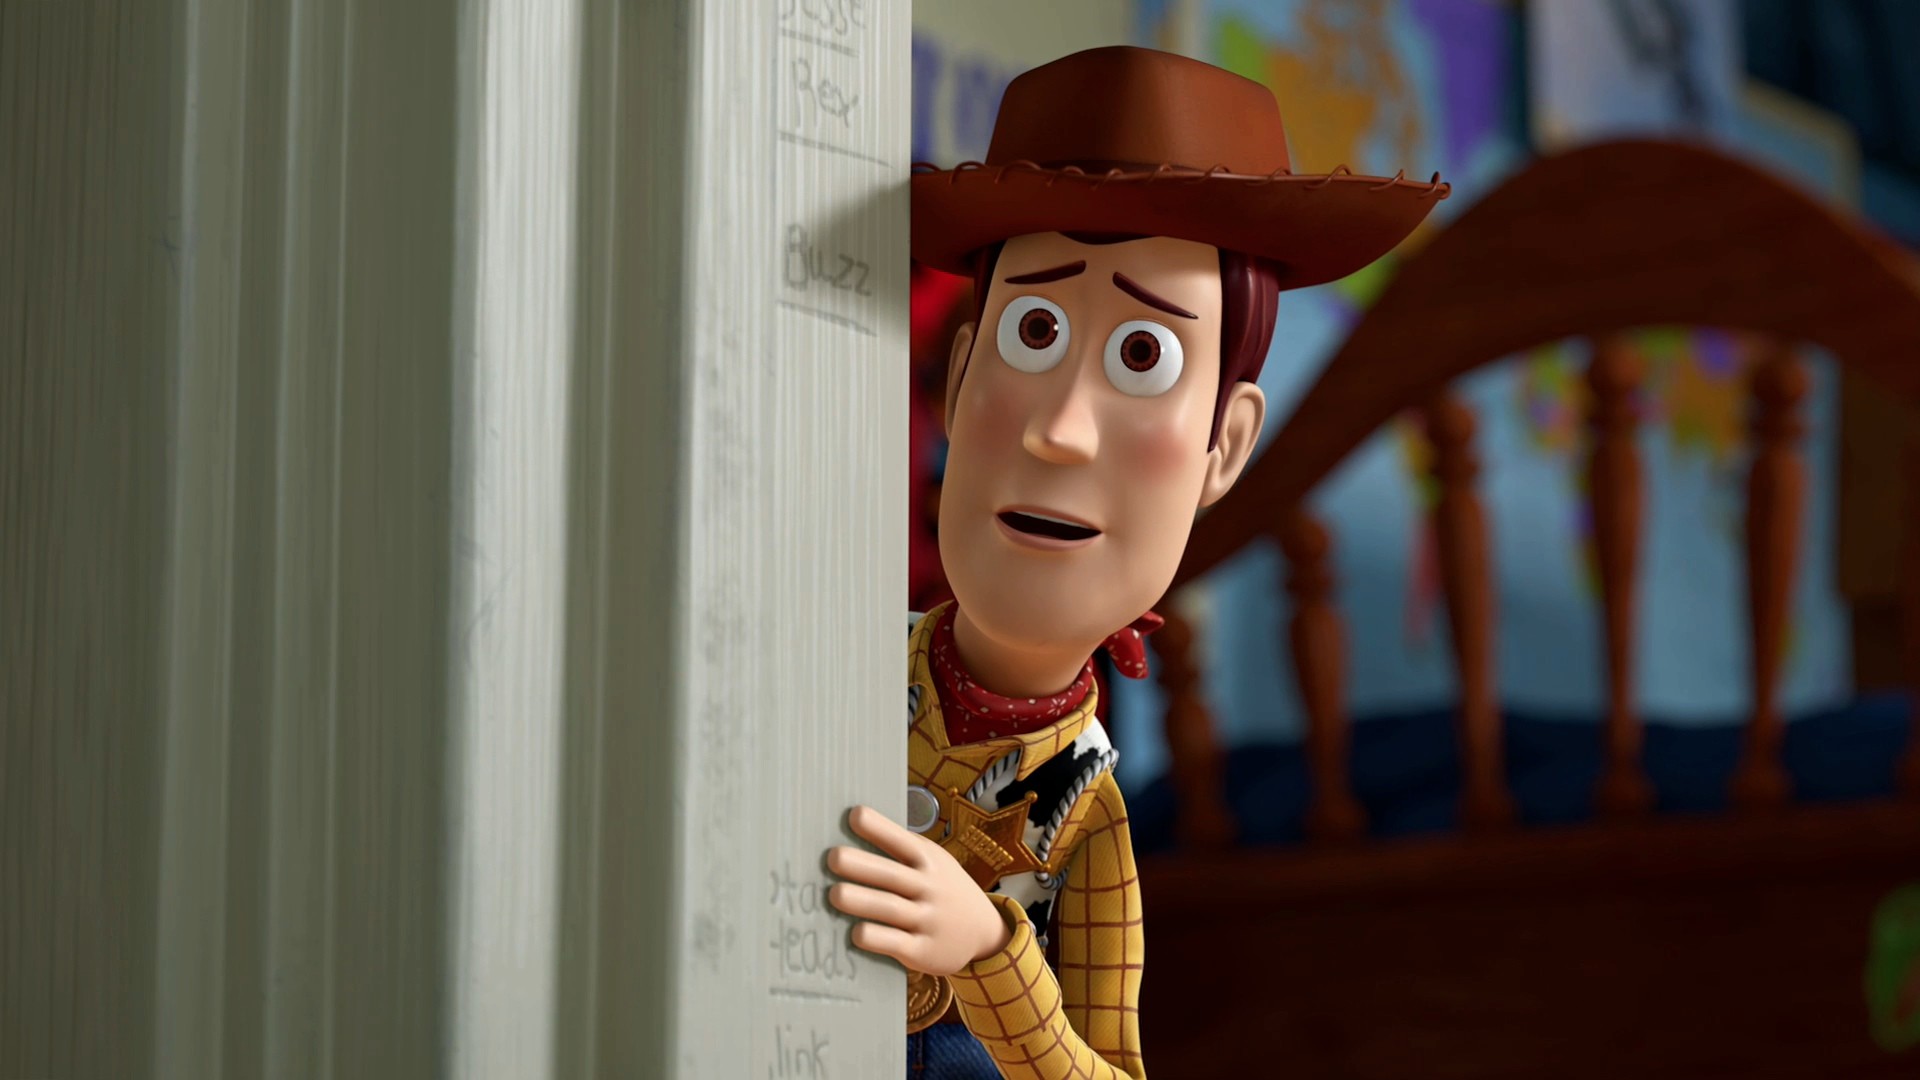 1920x1080 Toy Story Woody Wallpaper HD 49254